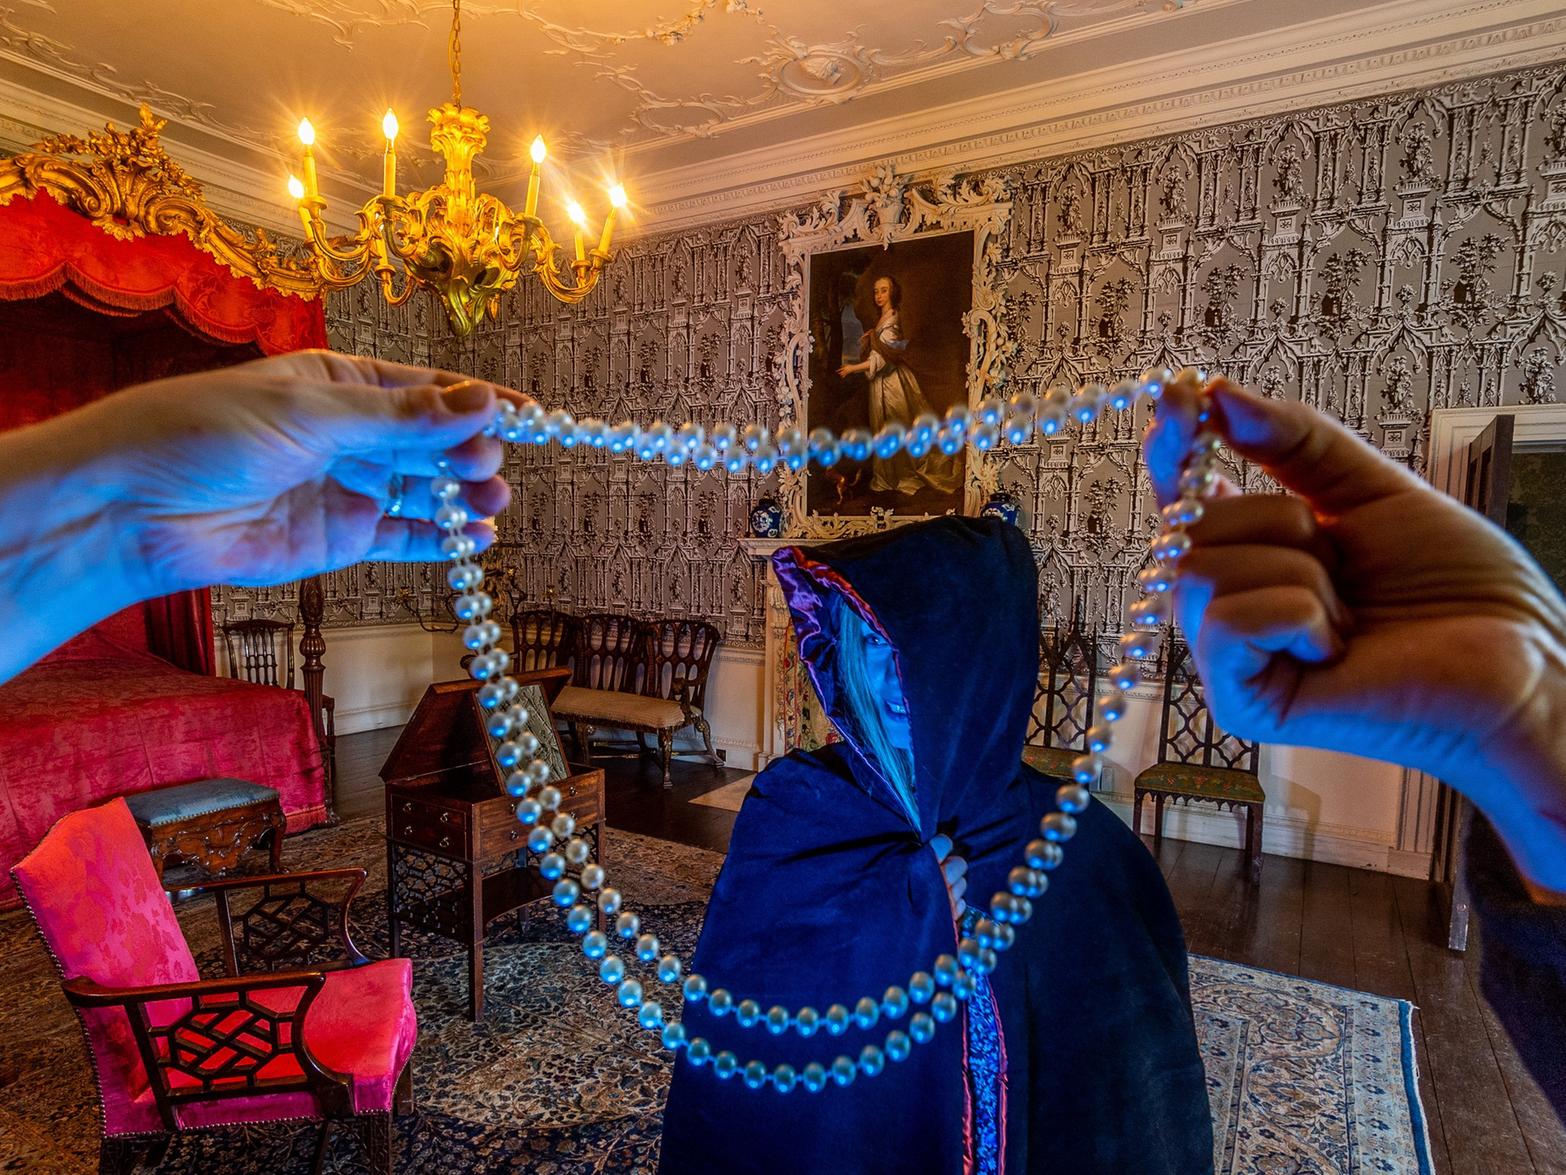 There are strange goings on in the Temple Newsam House where the ghosts have taken over - take a spooky tour of the house this Halloween. The family Halloween event will launch on Thursday, October 31 from 5pm to 8pm.